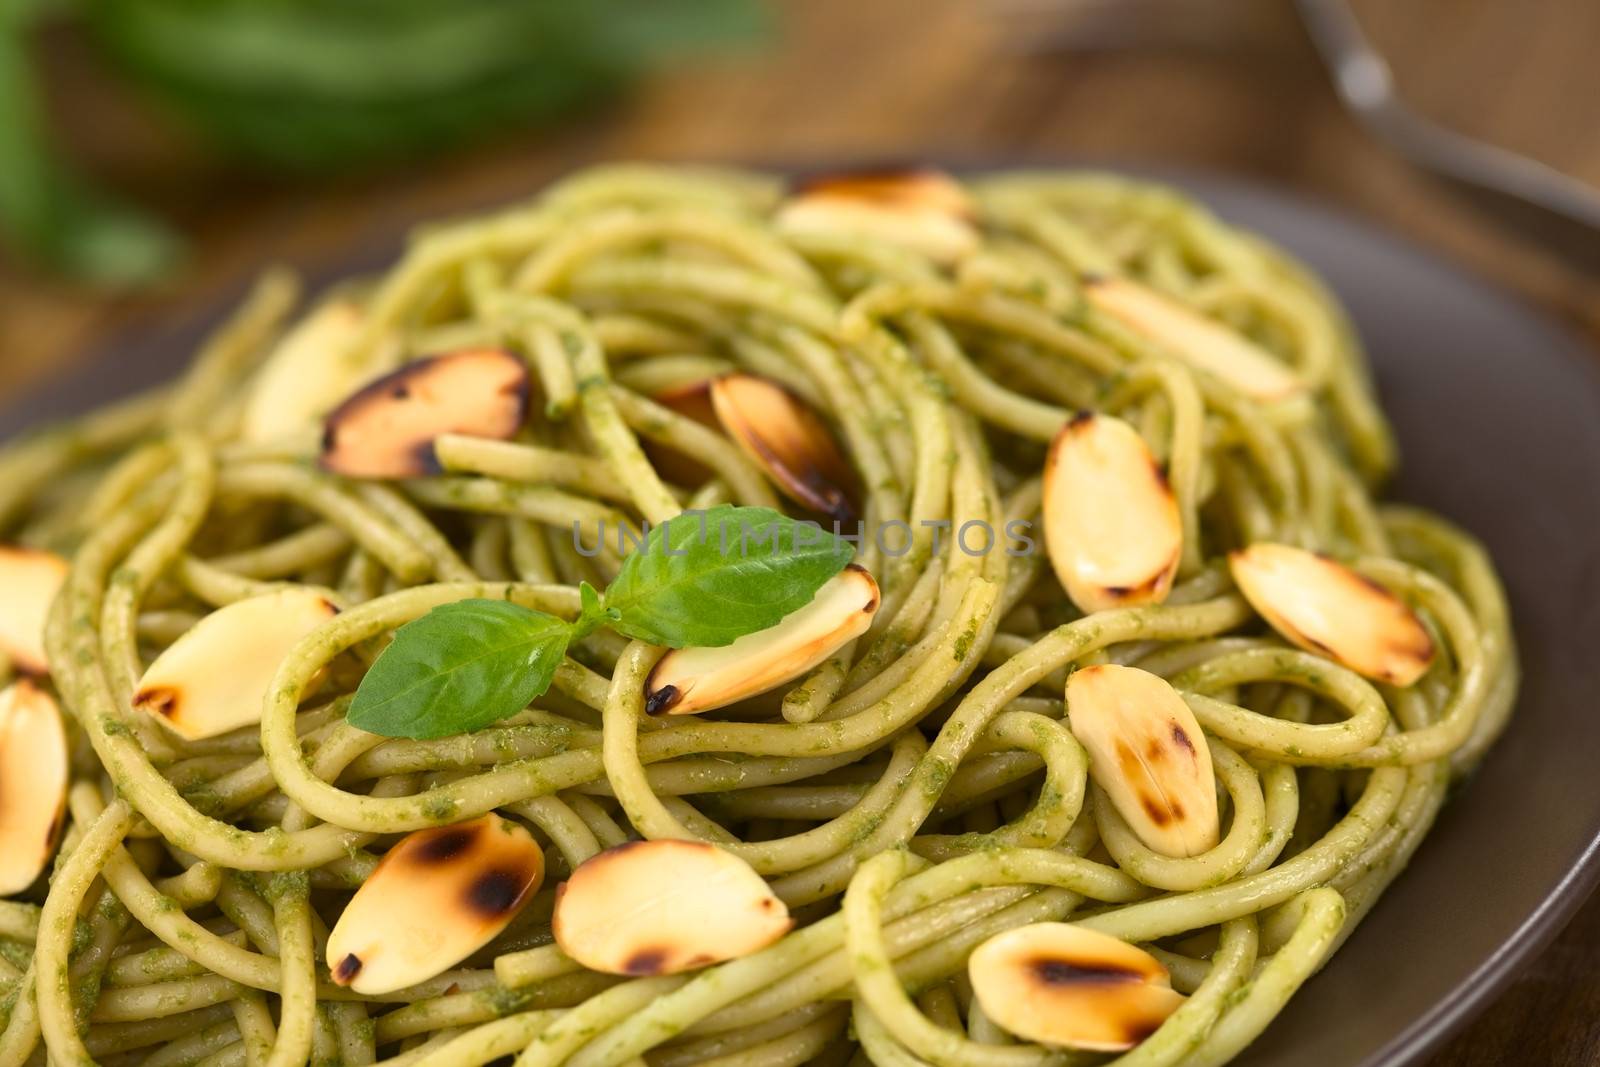 Pasta with pesto made of basil and spinach garnished with roasted almonds served on a brown plate (Selective Focus, Focus on the basil leaf on the dish)  